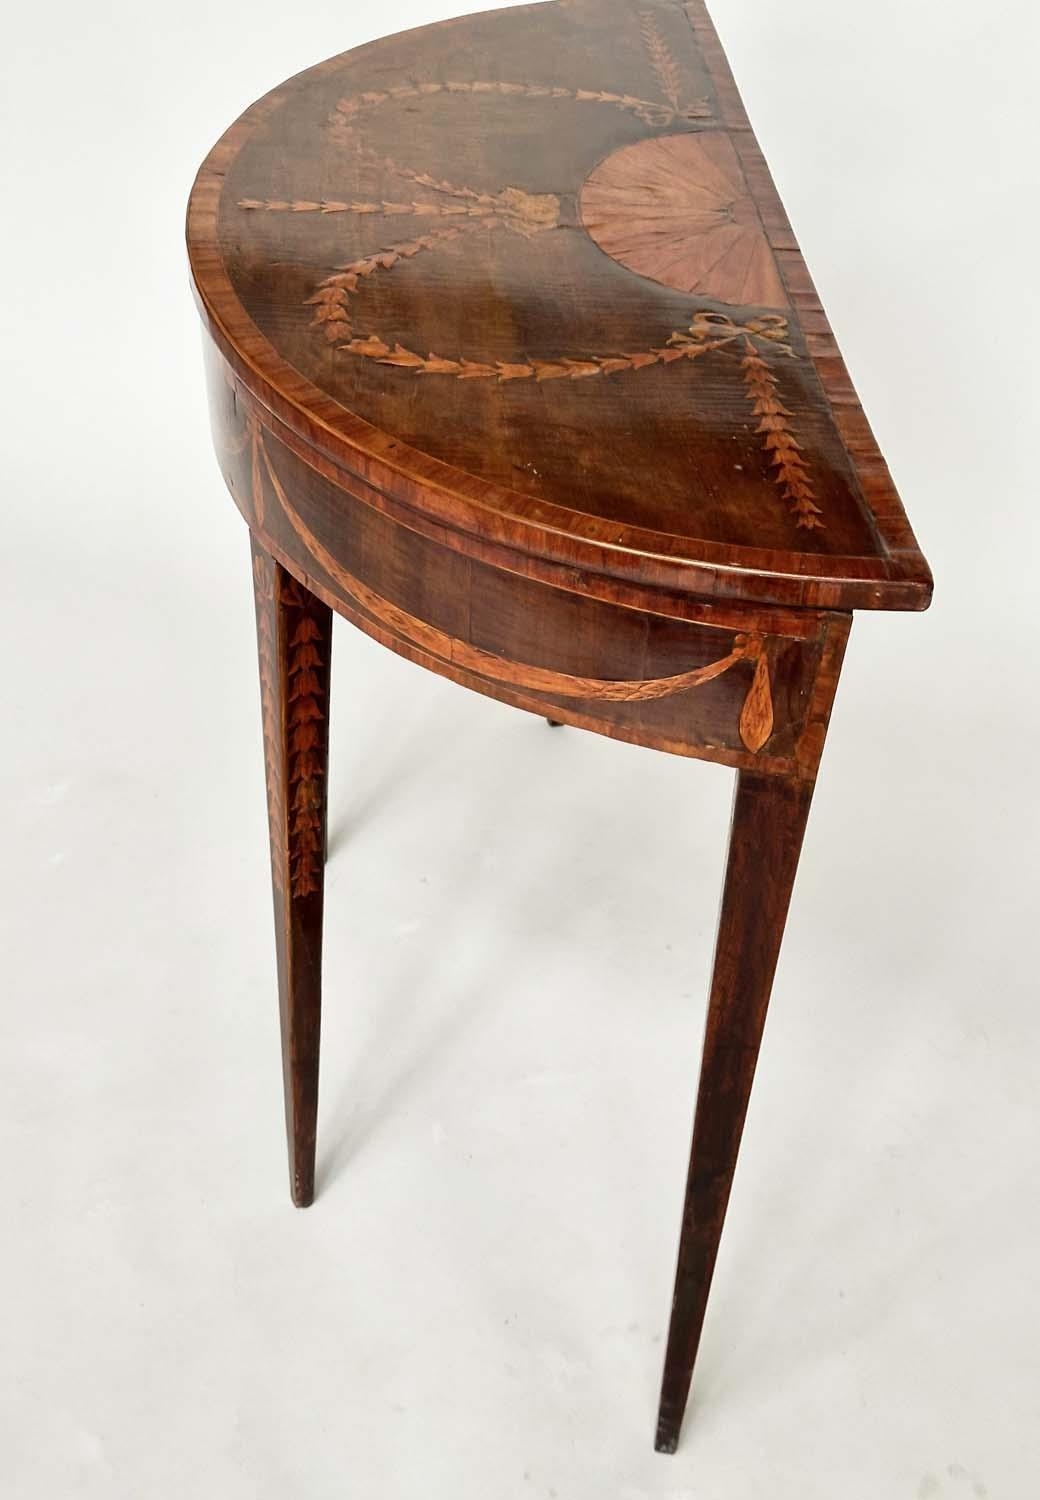 DEMI LUNE SIDE TABLE, George III, probably Irish, fiddle back mahogany and satinwood marquetry - Image 9 of 16